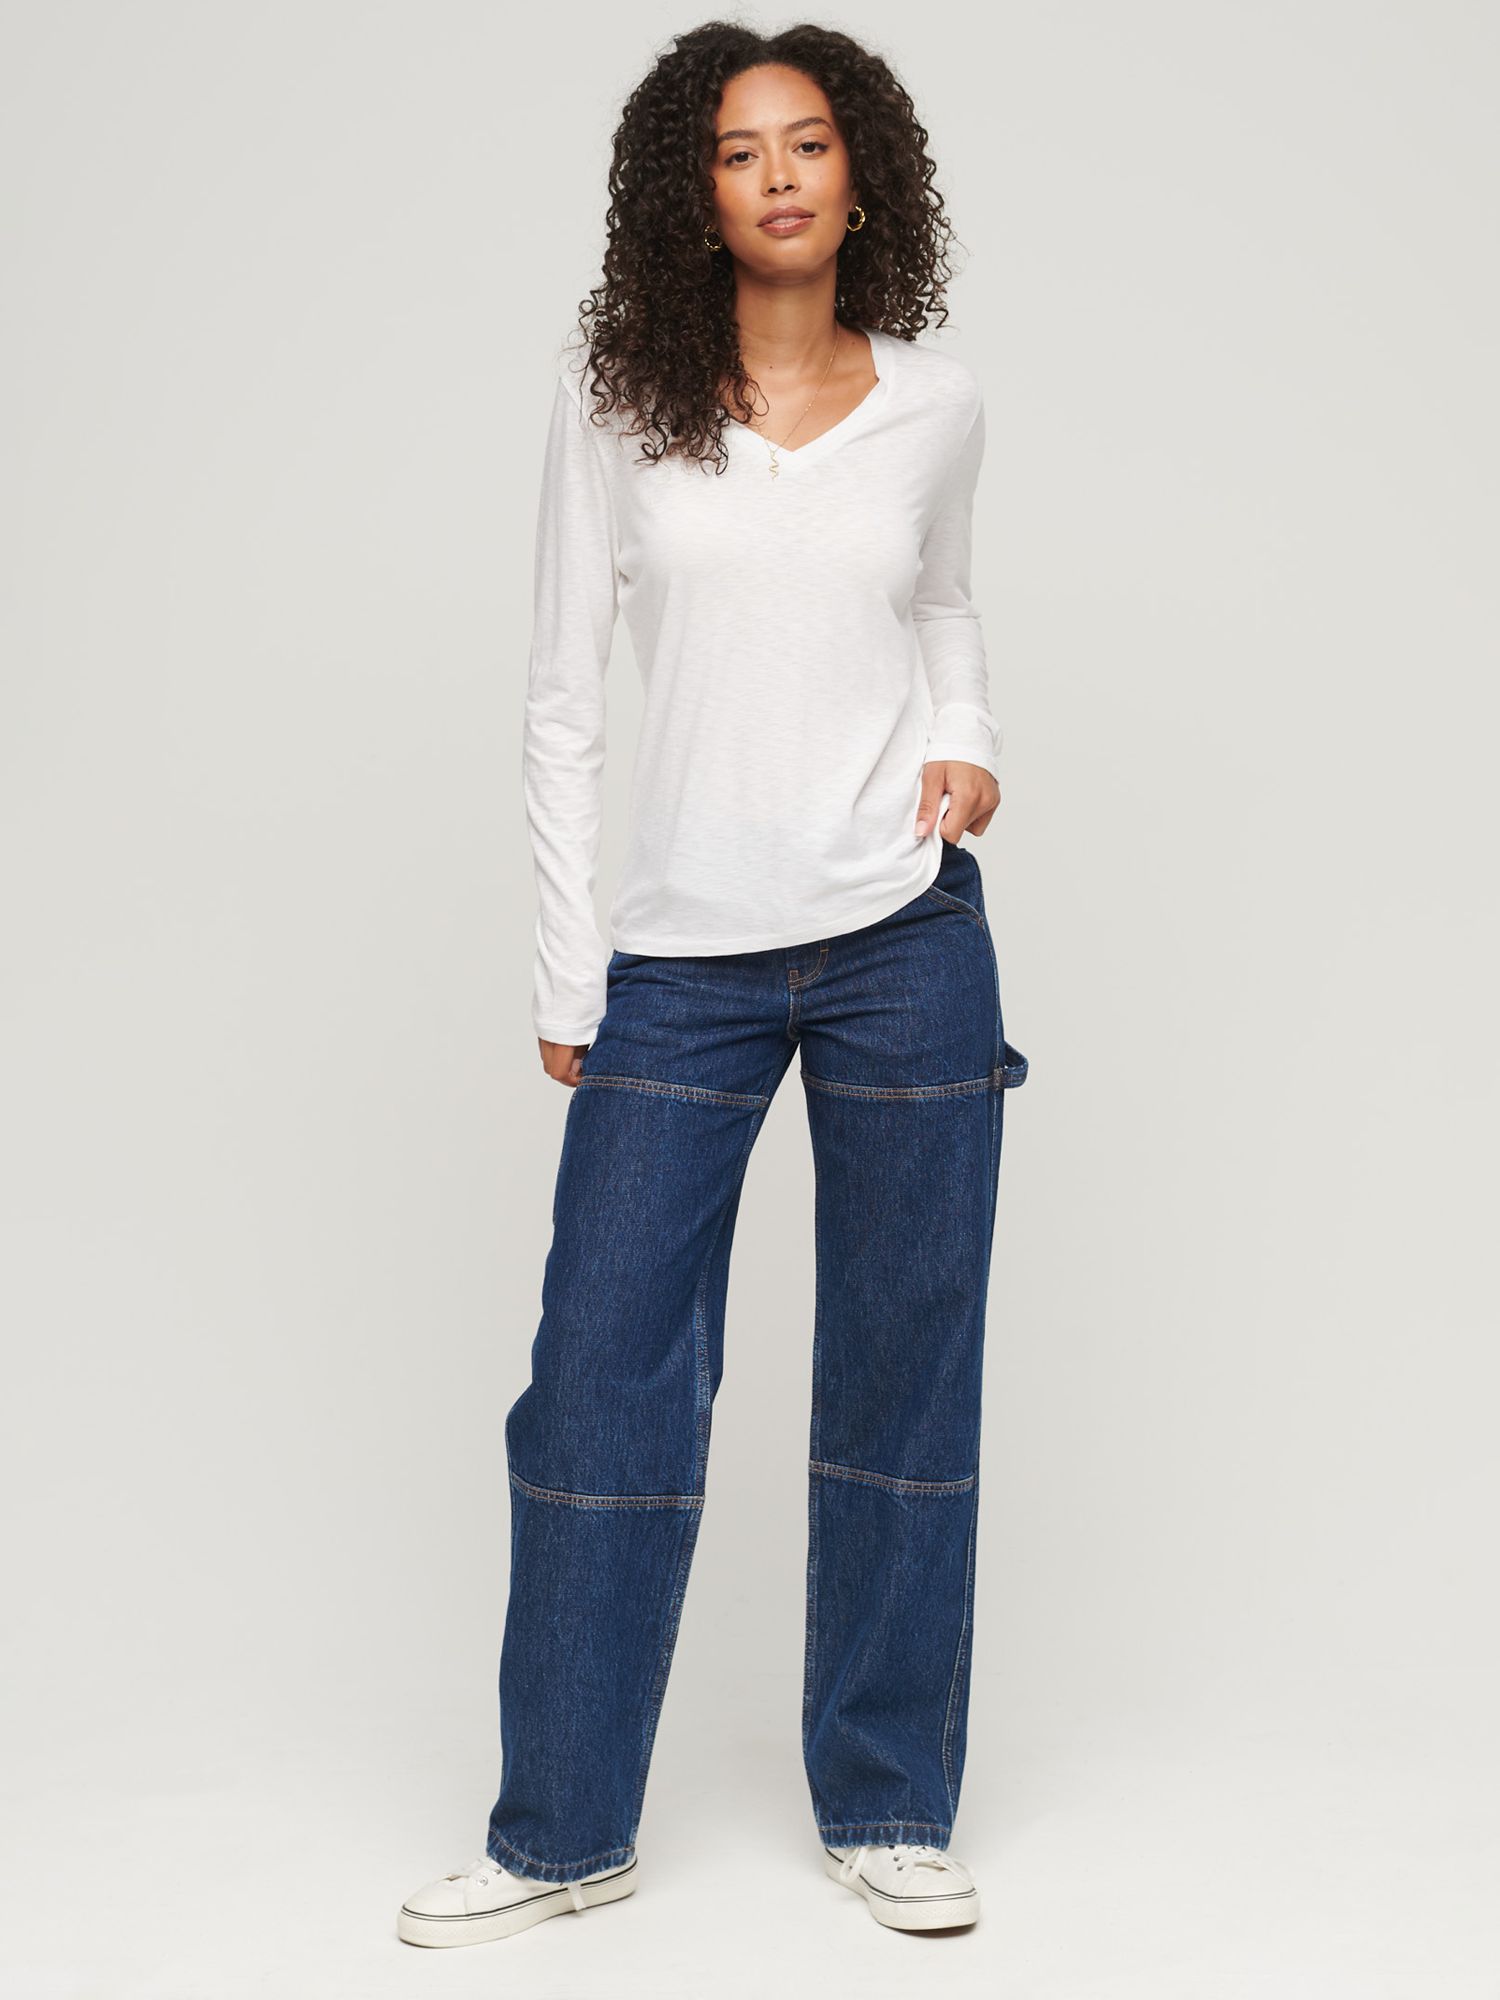 Superdry Long Sleeve at John V-Neck Top, Lewis & Partners Jersey Optic White